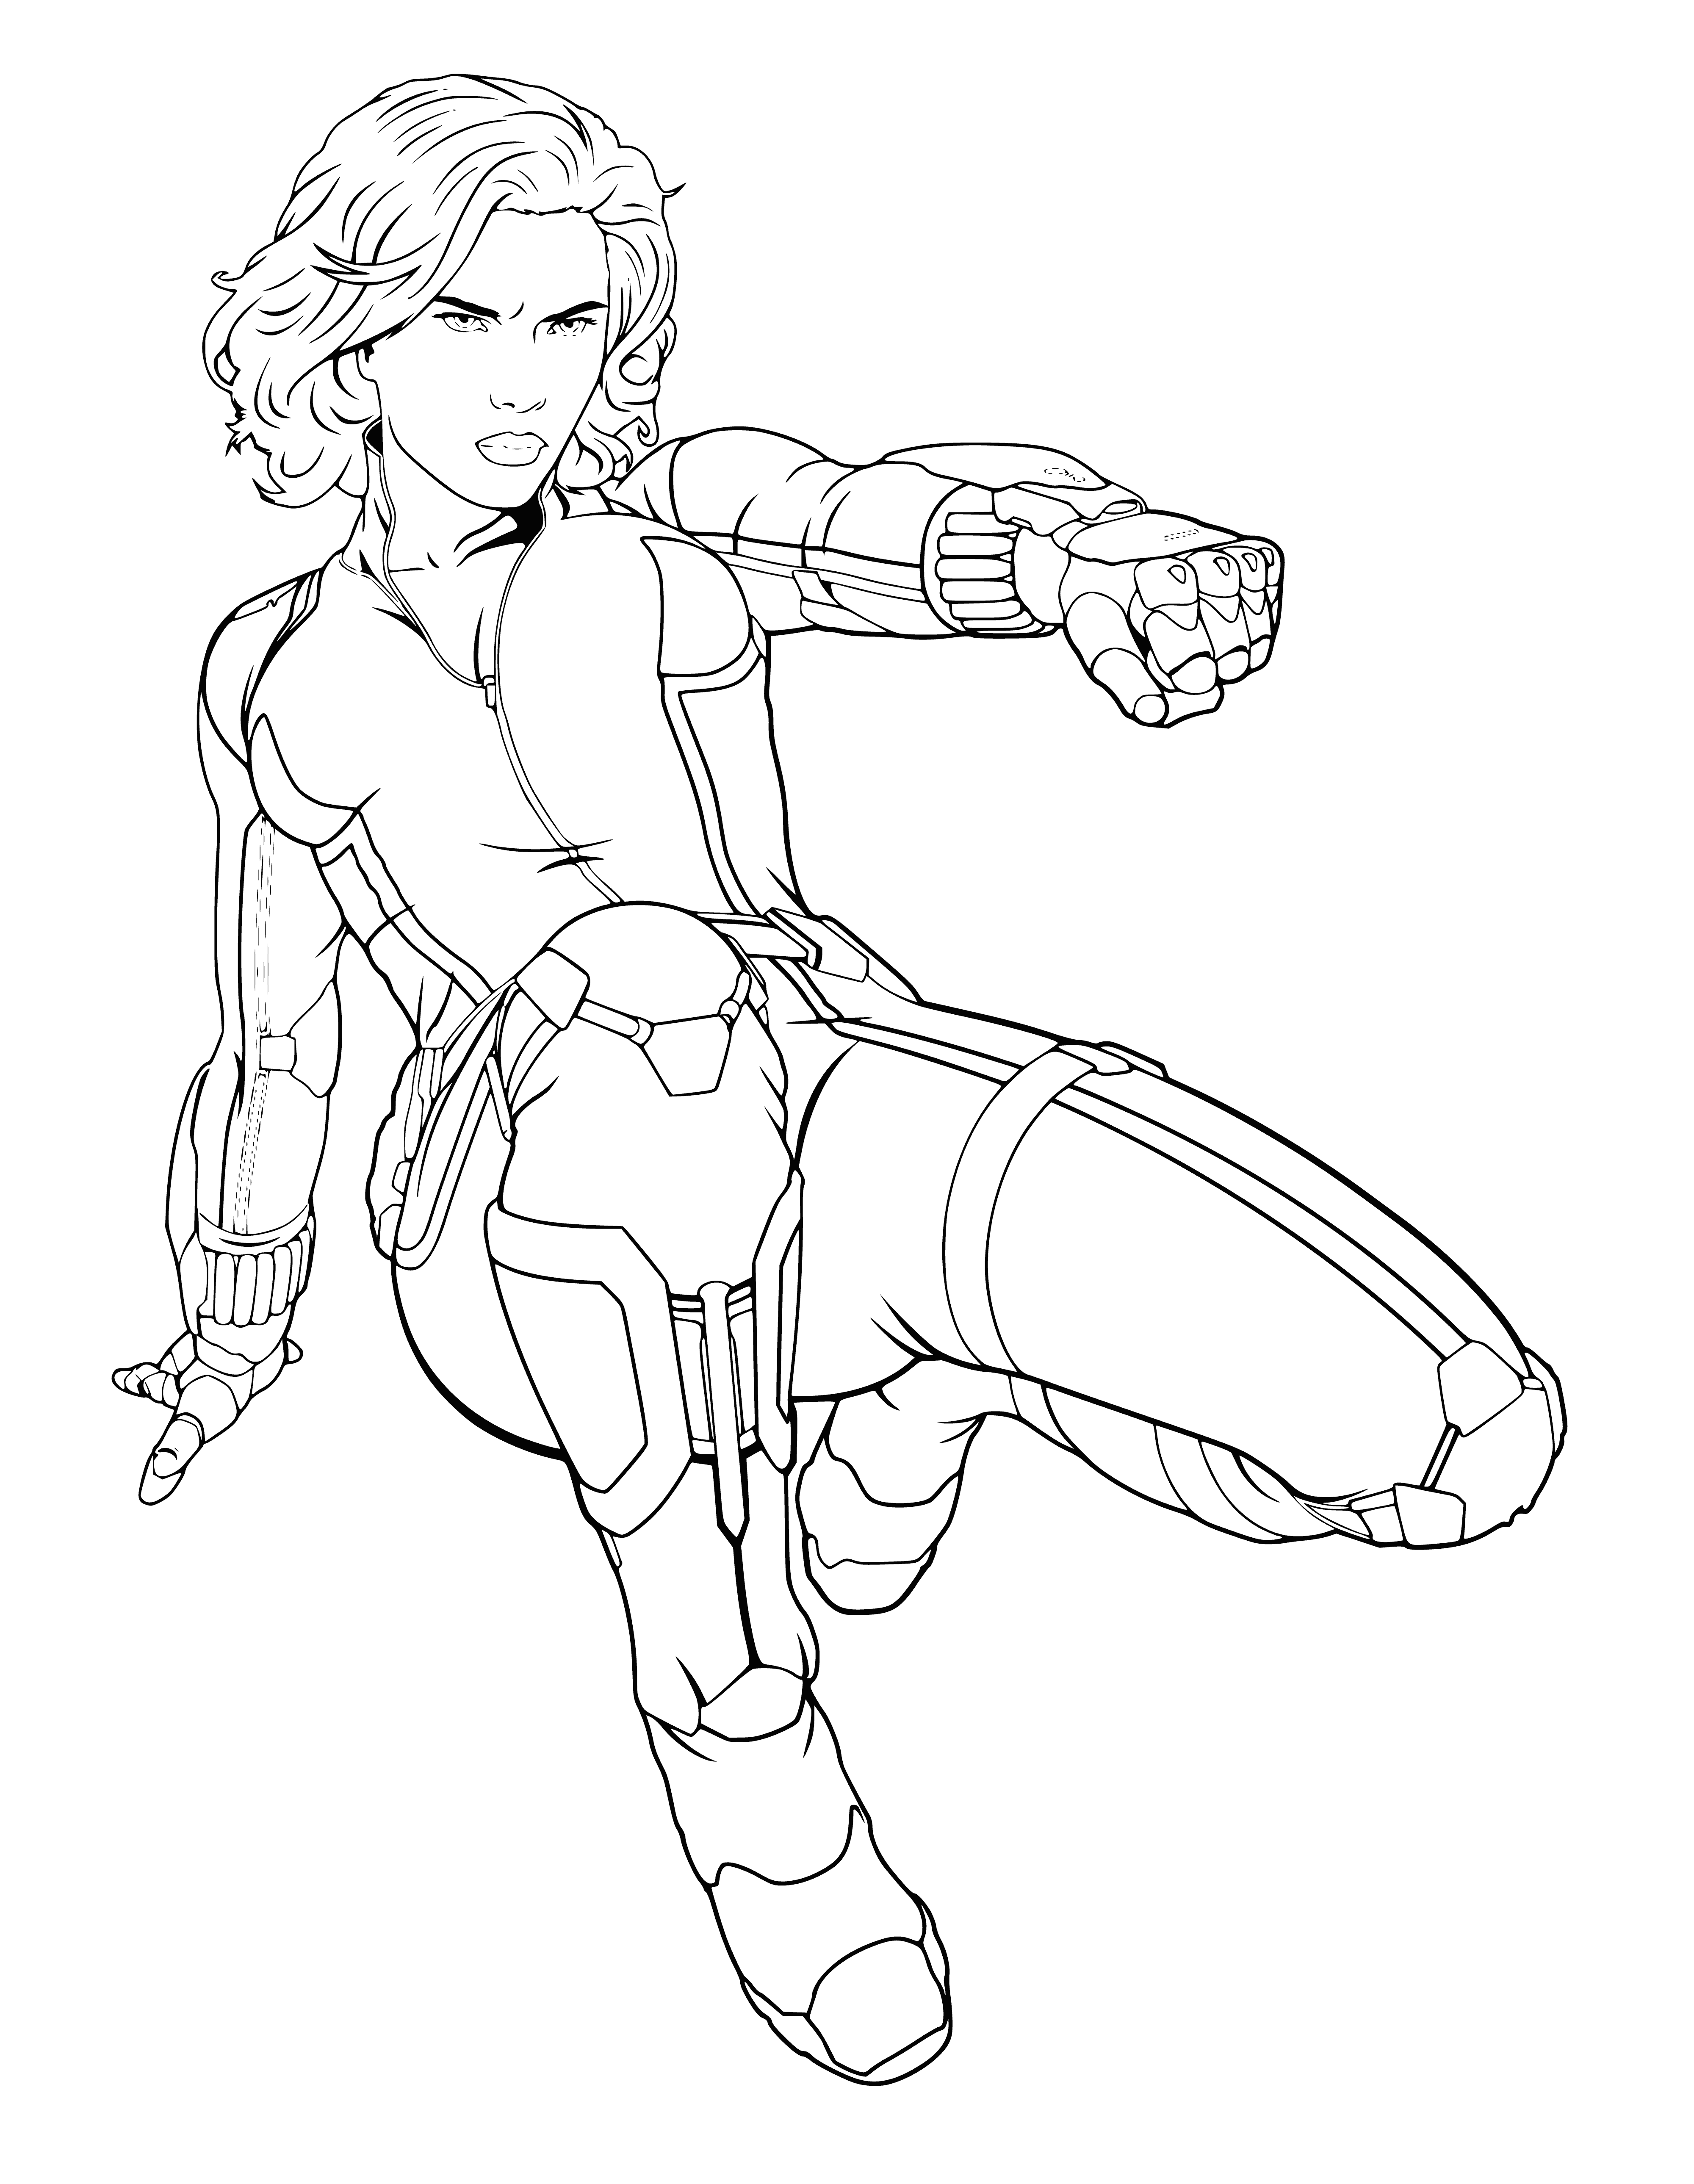 Black Widow coloring page